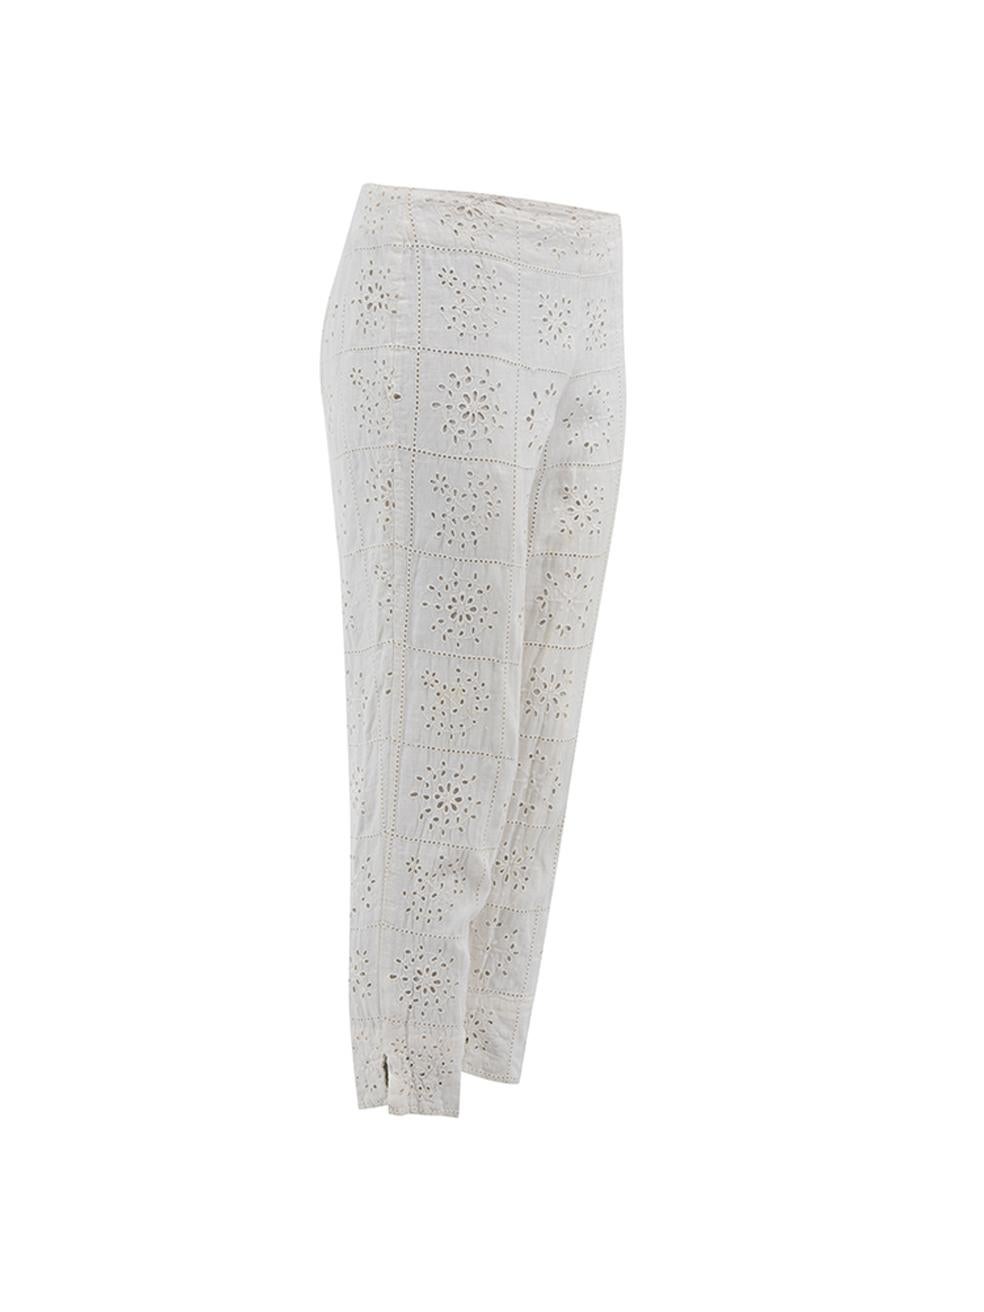 CONDITION is Very good. Minimal wear to pants is evident. Overall wear to the outer fabric where loose threads and pilling can be seen on this used Ralph Lauren designer resale item. Details Cream Linen Floral lace block pattern Cropped straight leg